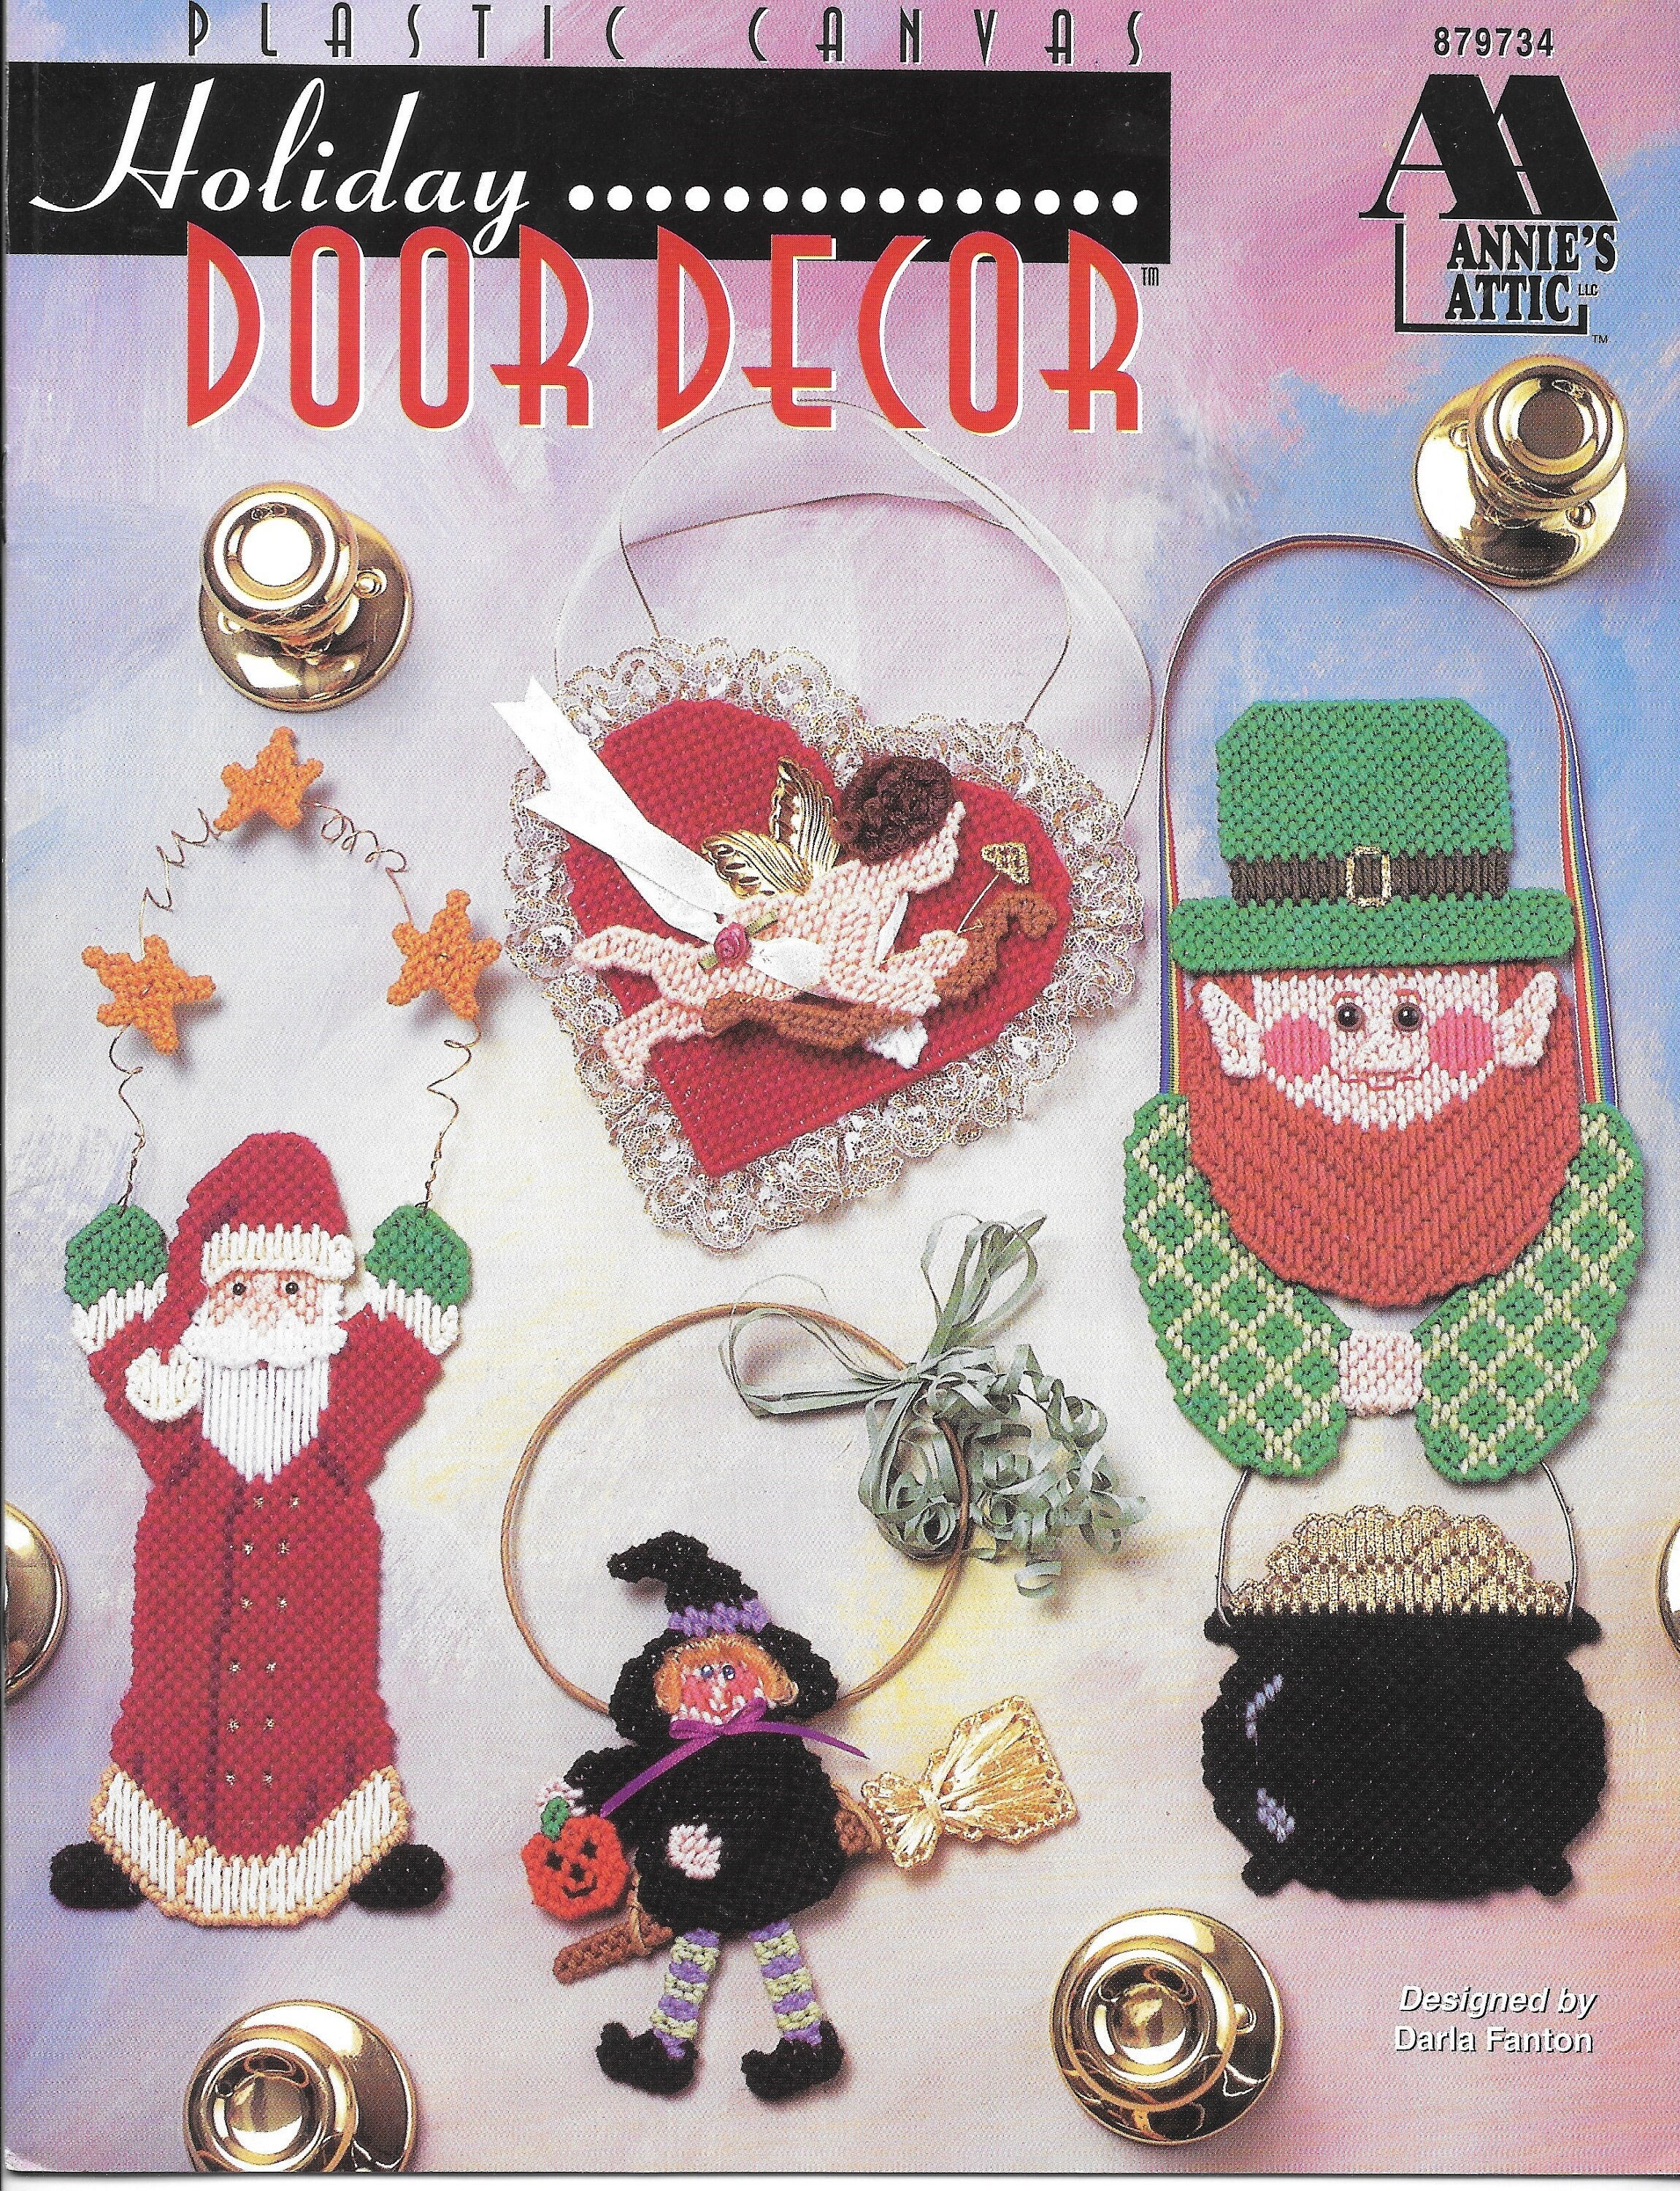 Holiday Door Decor, Plastic Canvas Leaflet by Annnie's Attic